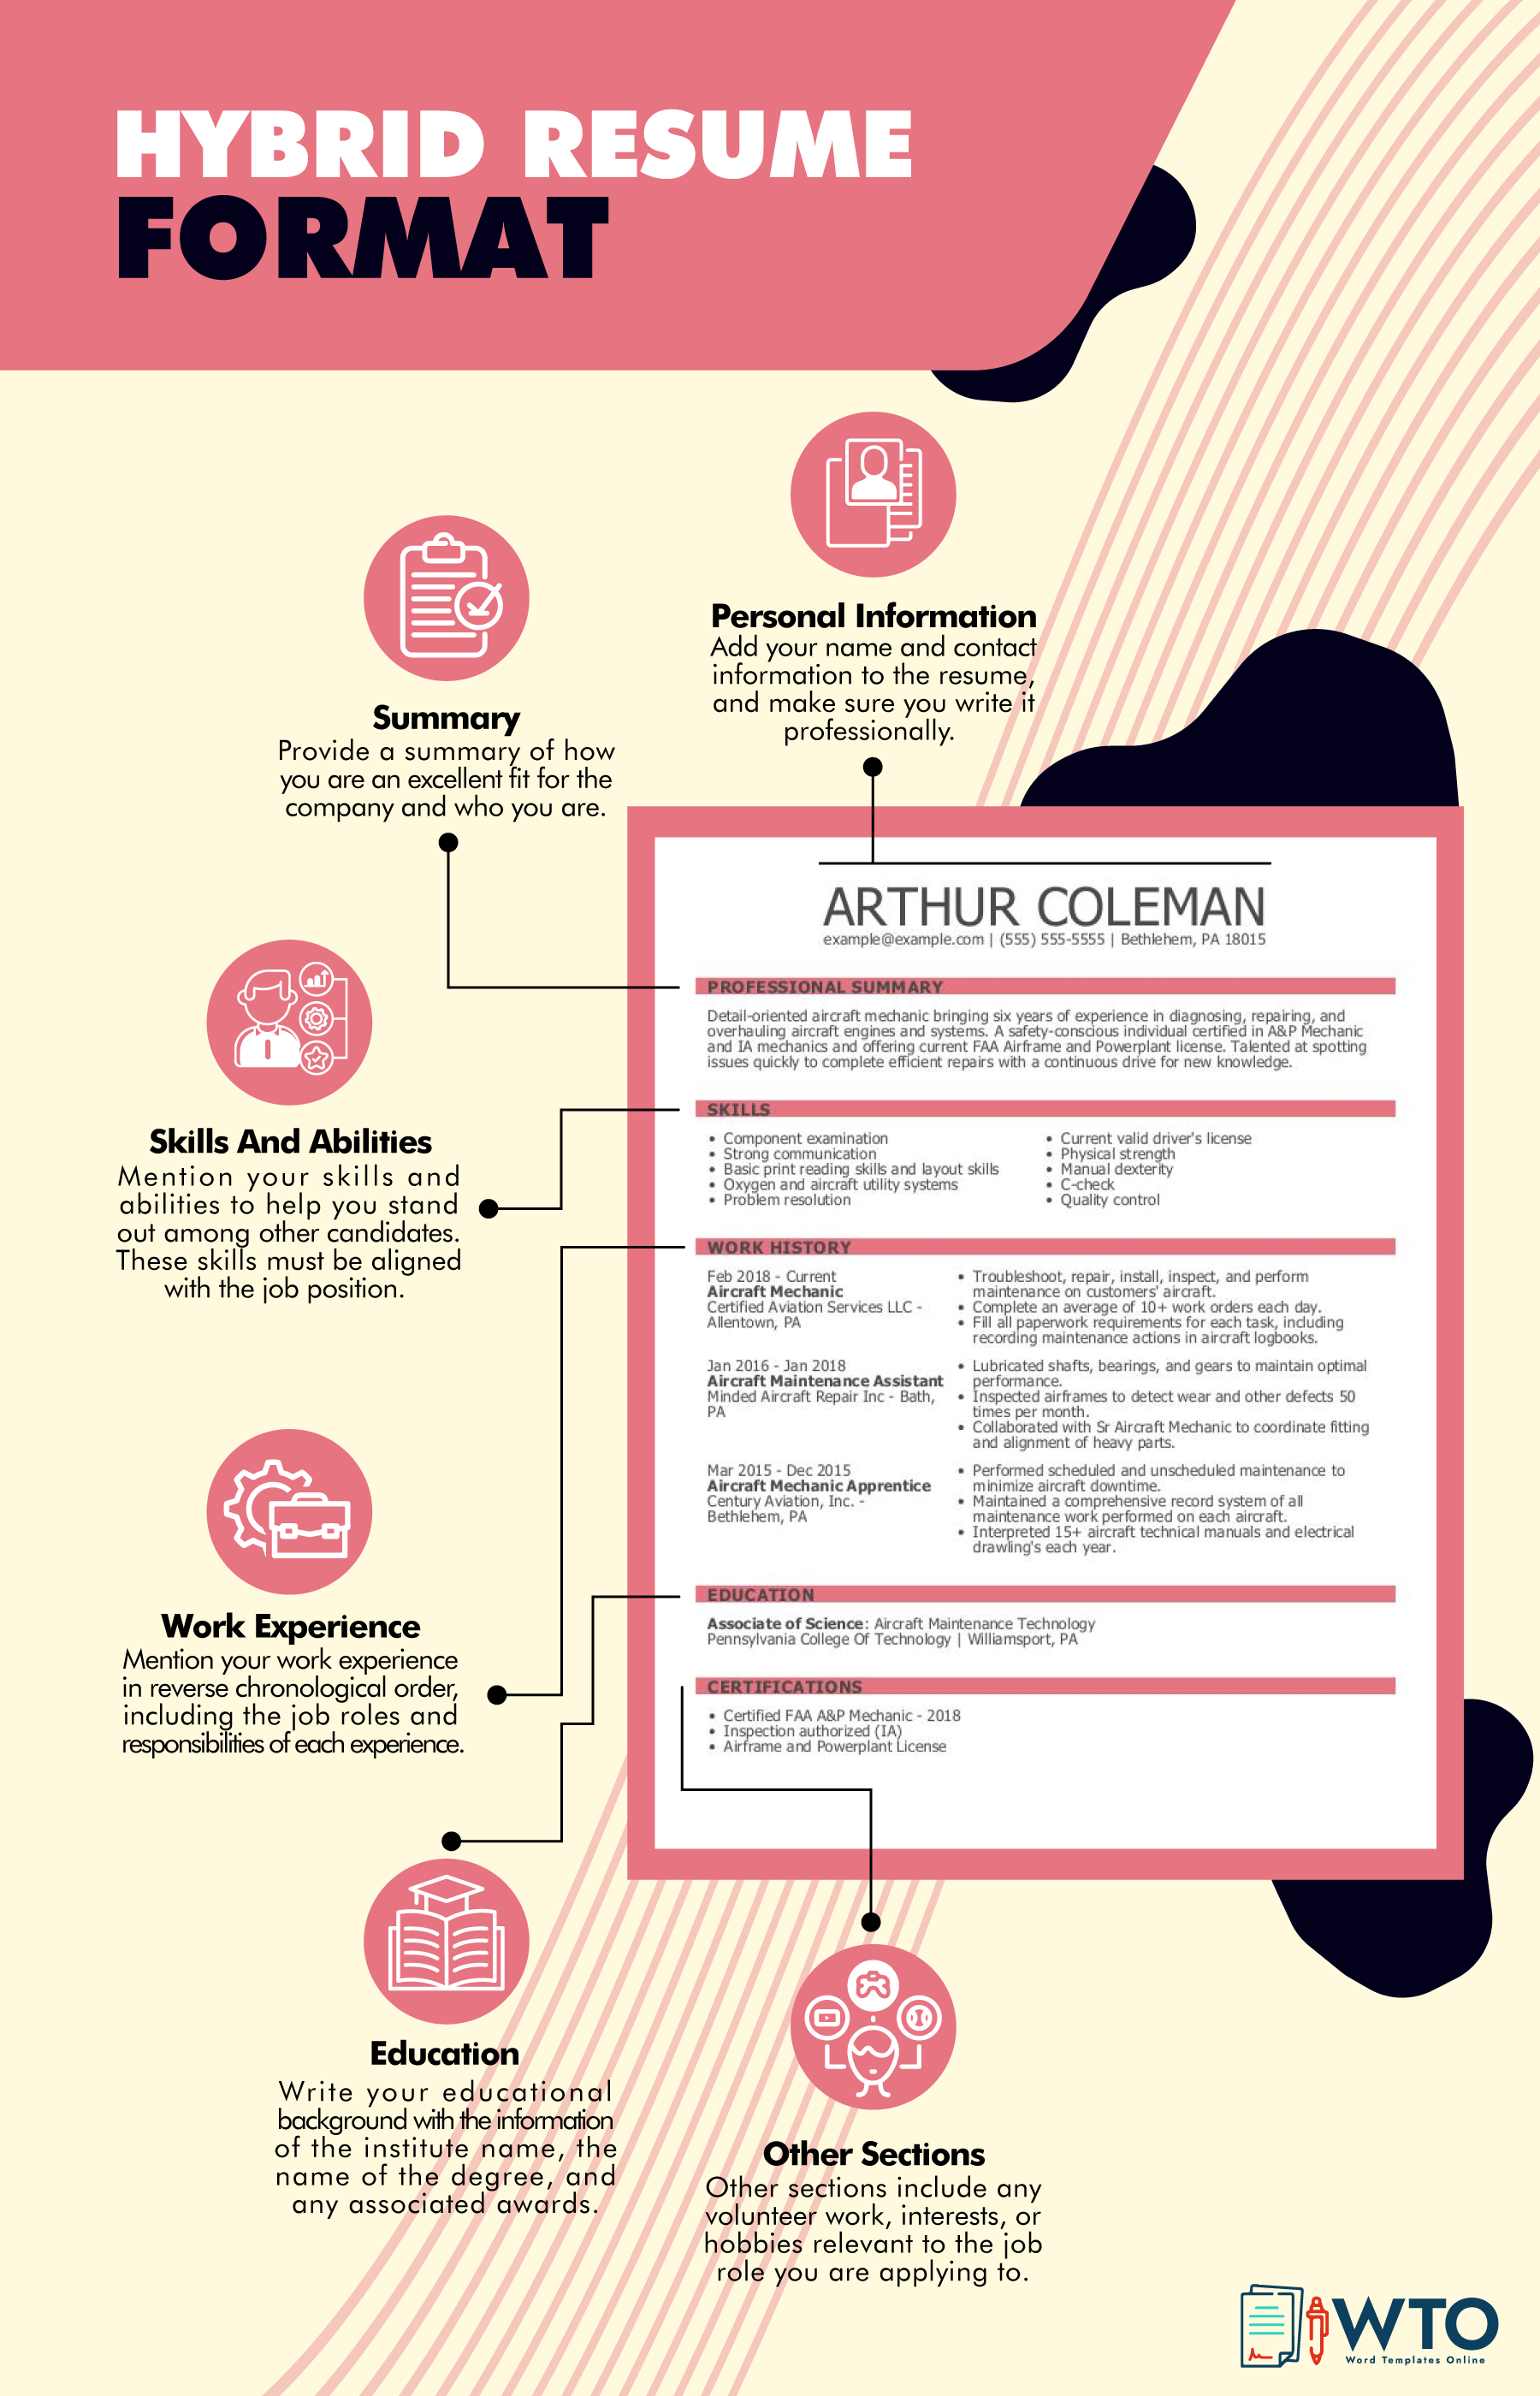 This  infographic is about the Hybrid Resume Format.